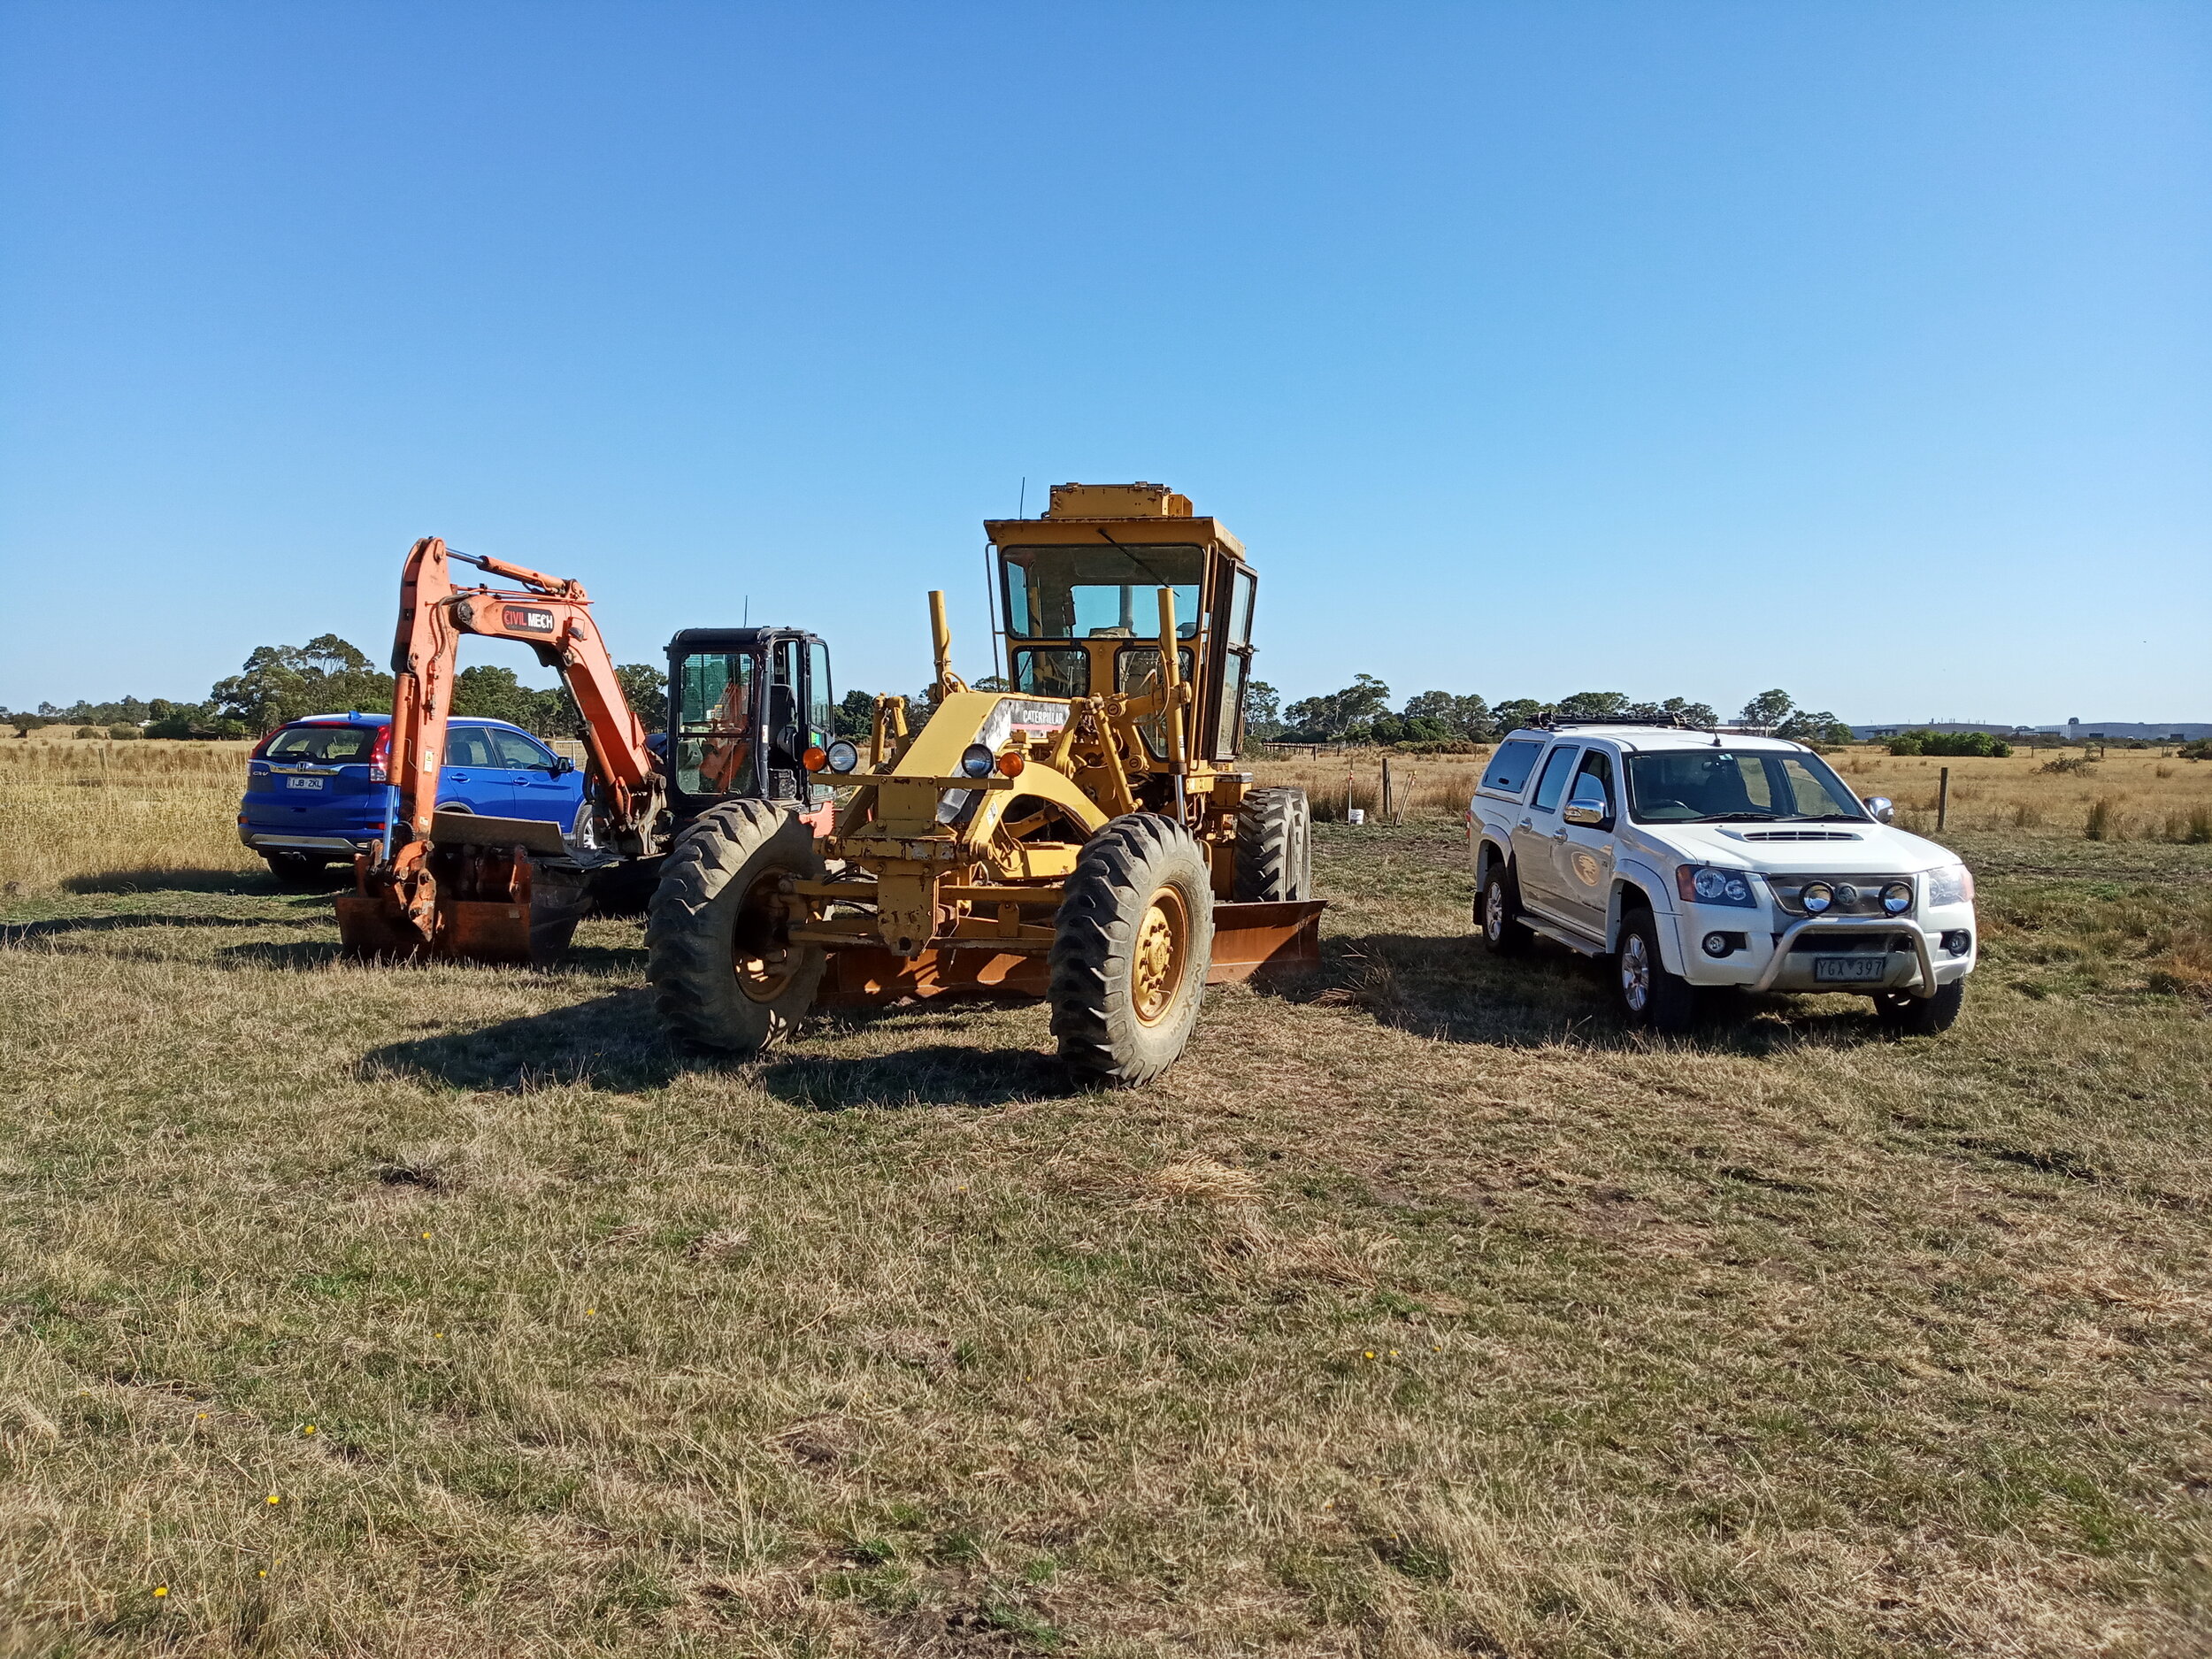  18/2  Civilmech equipment onsite at MX ready to begin the earthworks  